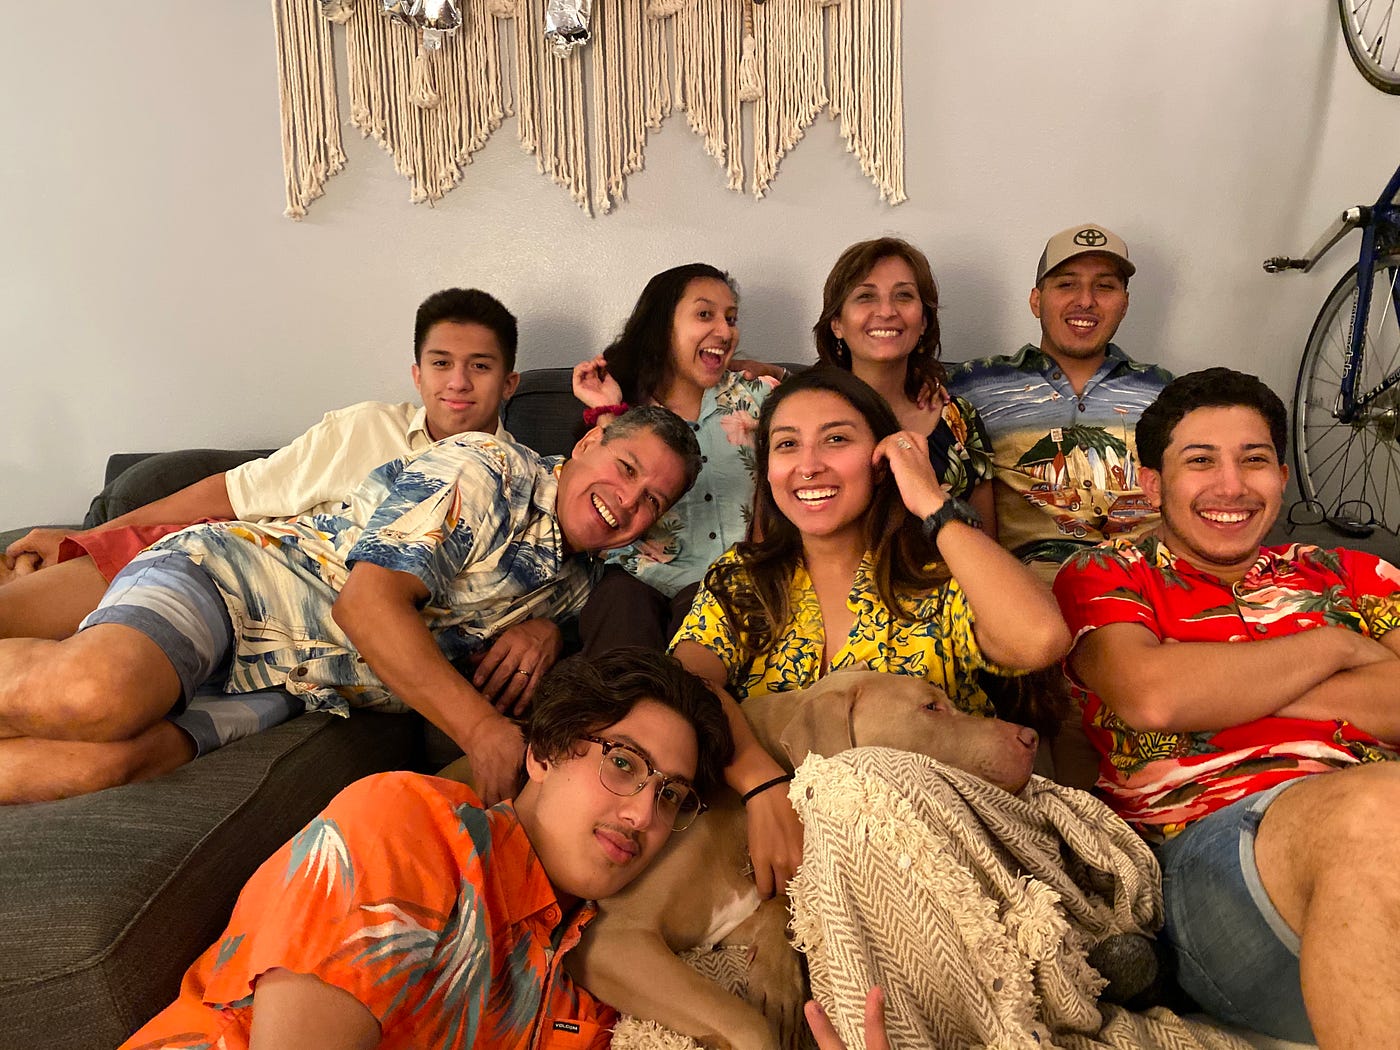 The Mancilla family all laughing and wearing Hawaiian tee shirts for a family group pic on a couch.